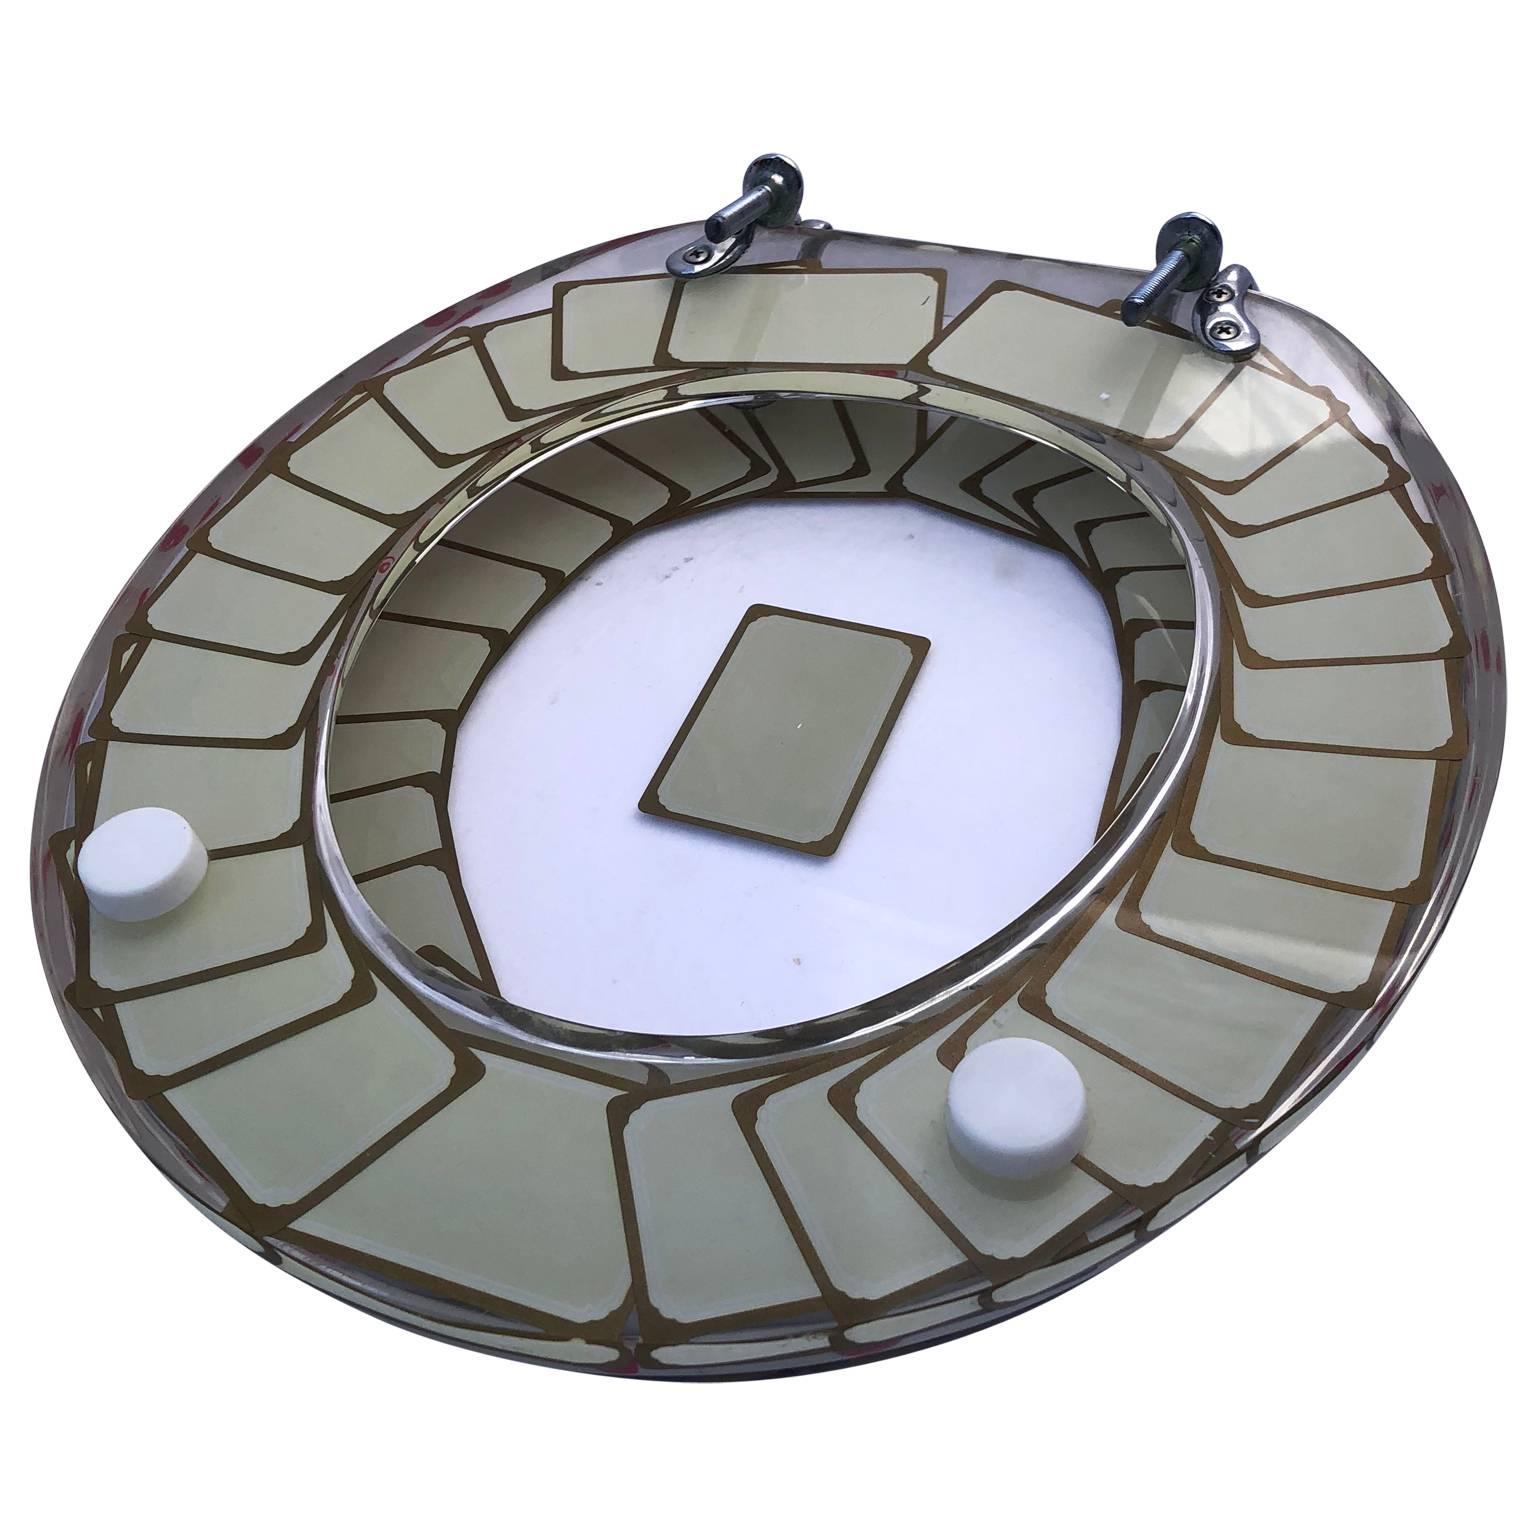 Mid-Century Modern Vintage Lucite Toilet Seat with Deck of Cards Theme and Chrome Hardware